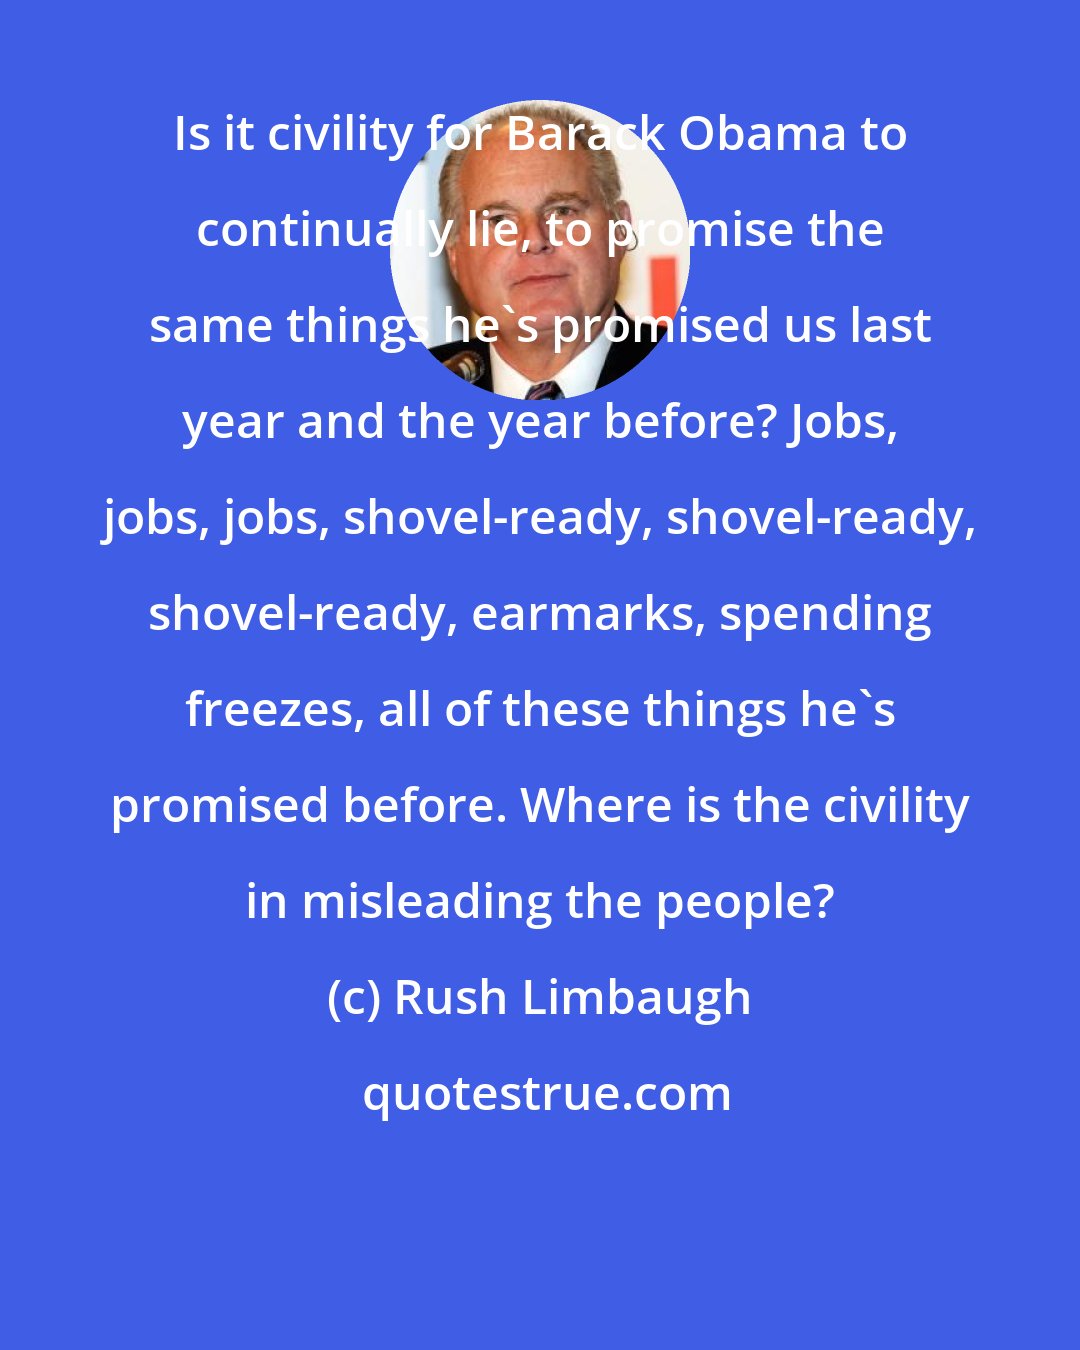 Rush Limbaugh: Is it civility for Barack Obama to continually lie, to promise the same things he's promised us last year and the year before? Jobs, jobs, jobs, shovel-ready, shovel-ready, shovel-ready, earmarks, spending freezes, all of these things he's promised before. Where is the civility in misleading the people?